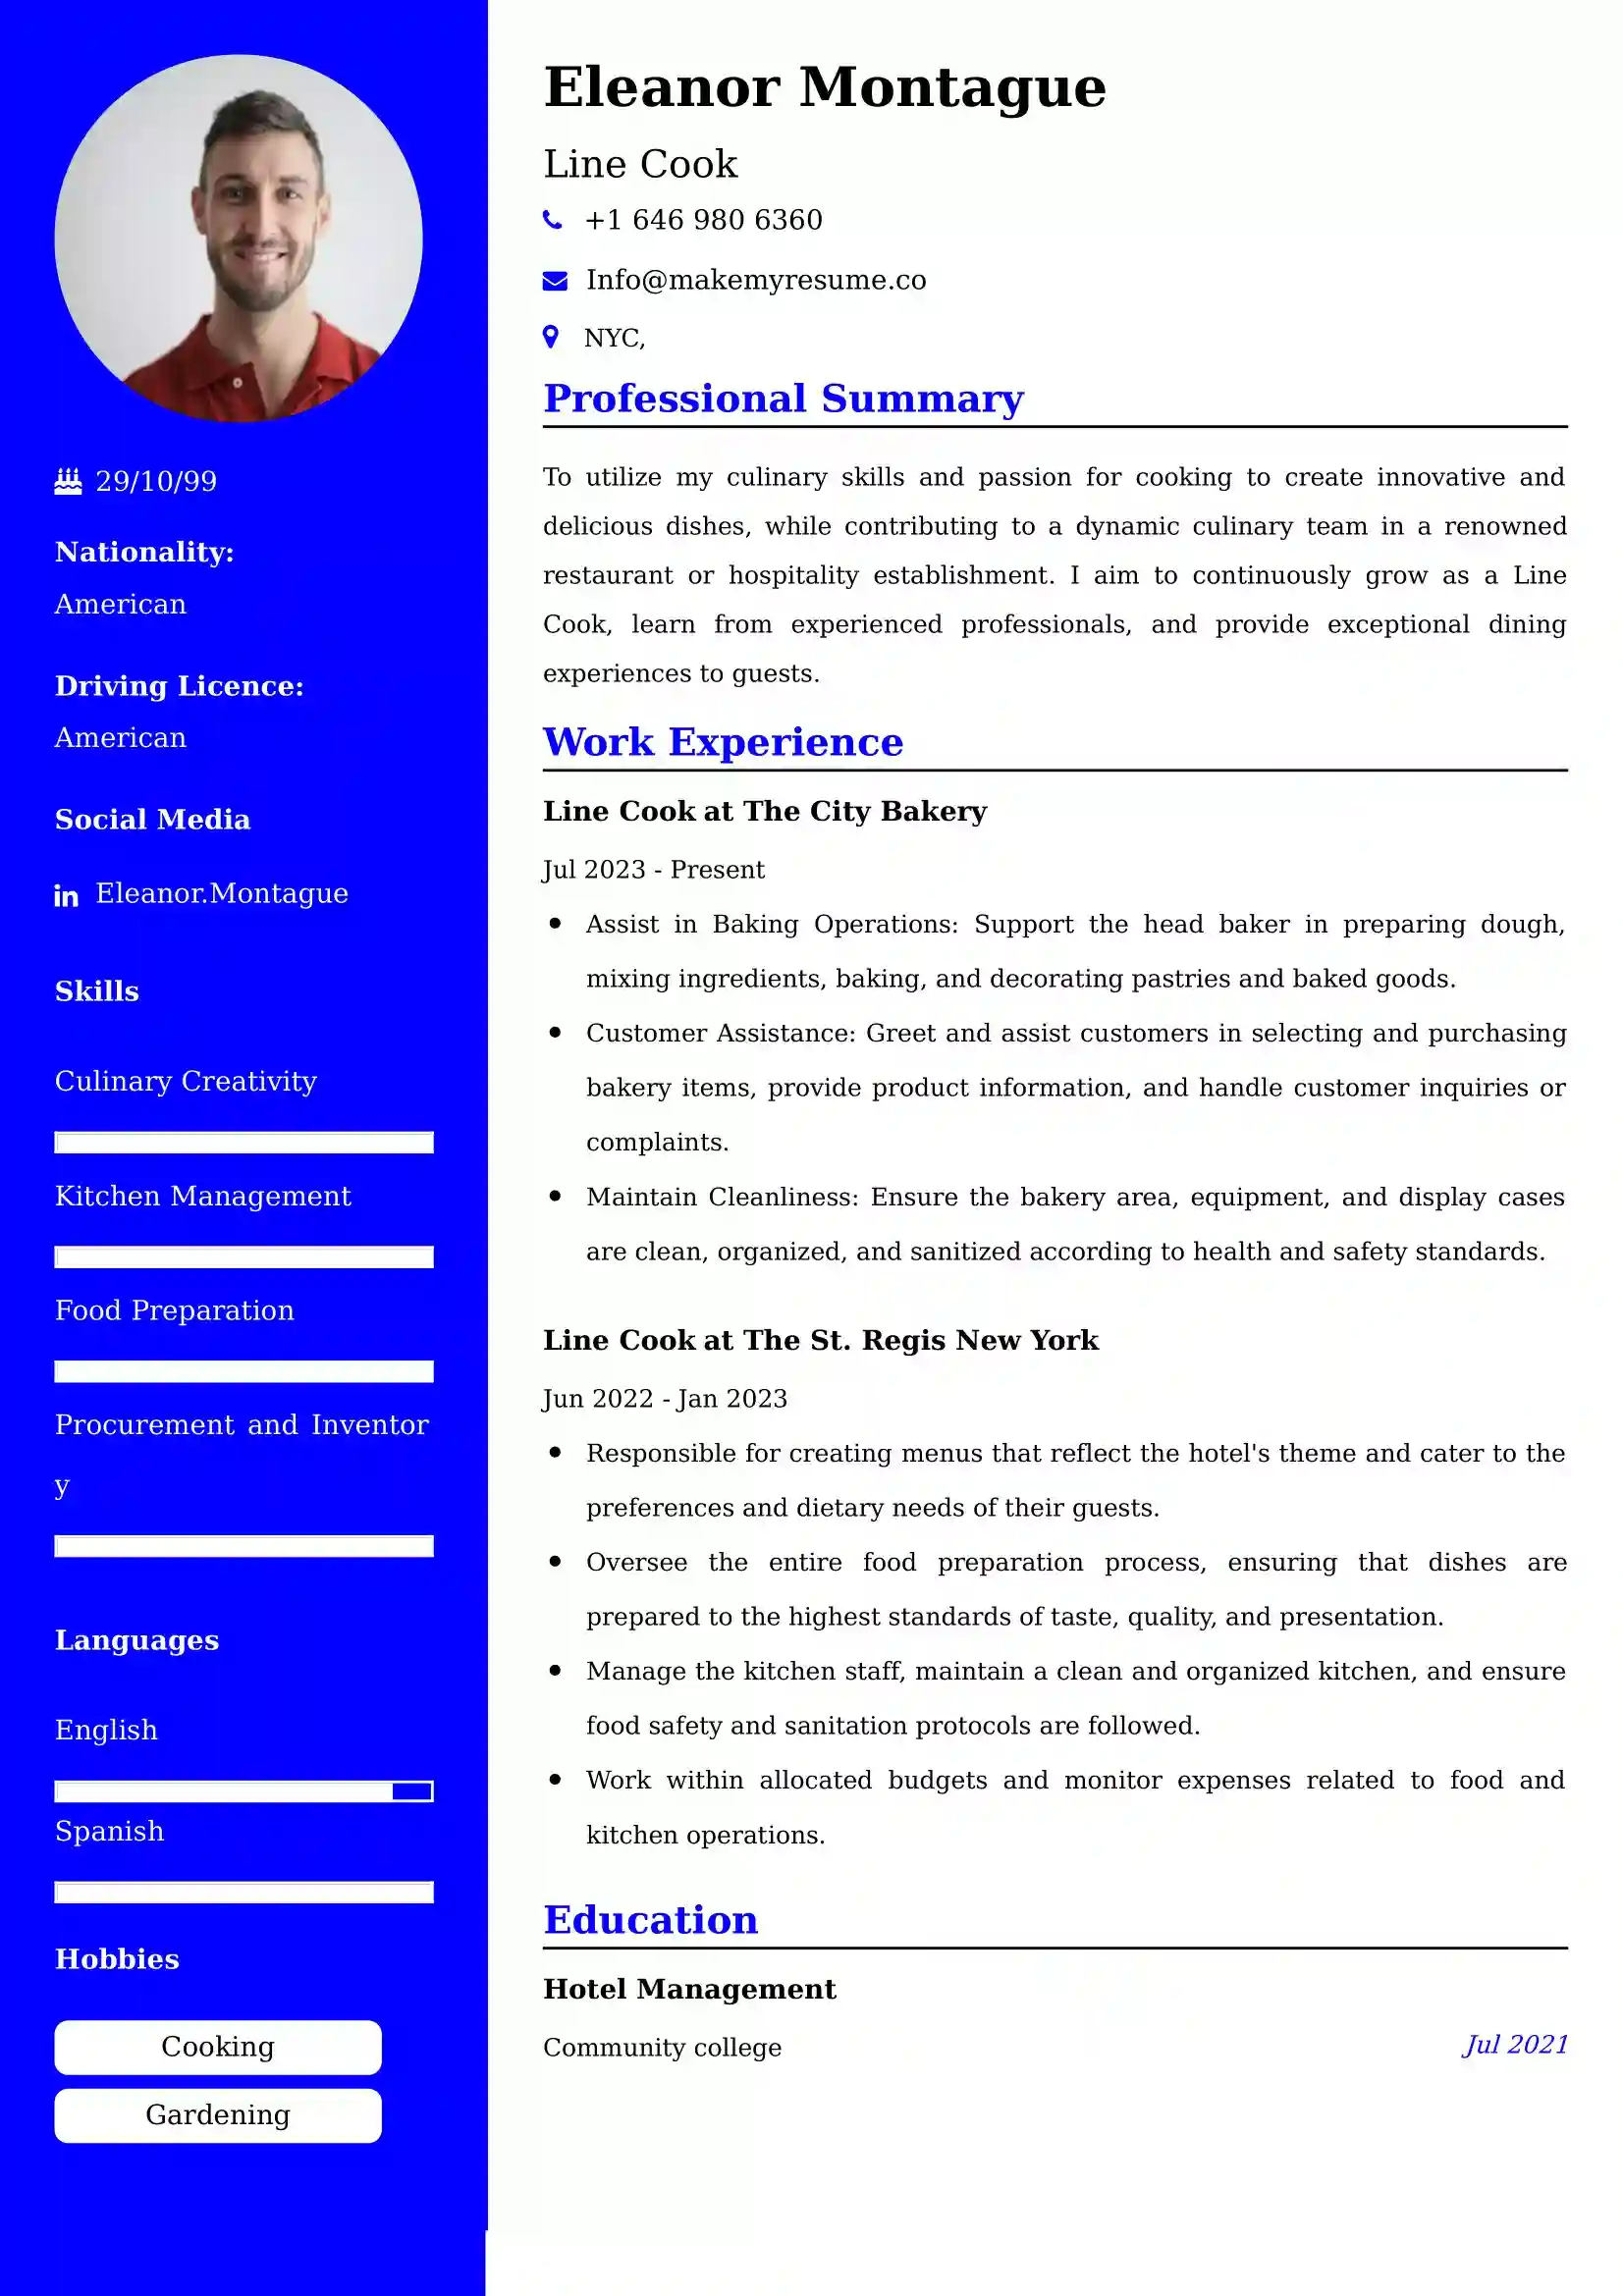 Line Cook Resume Examples for UAE